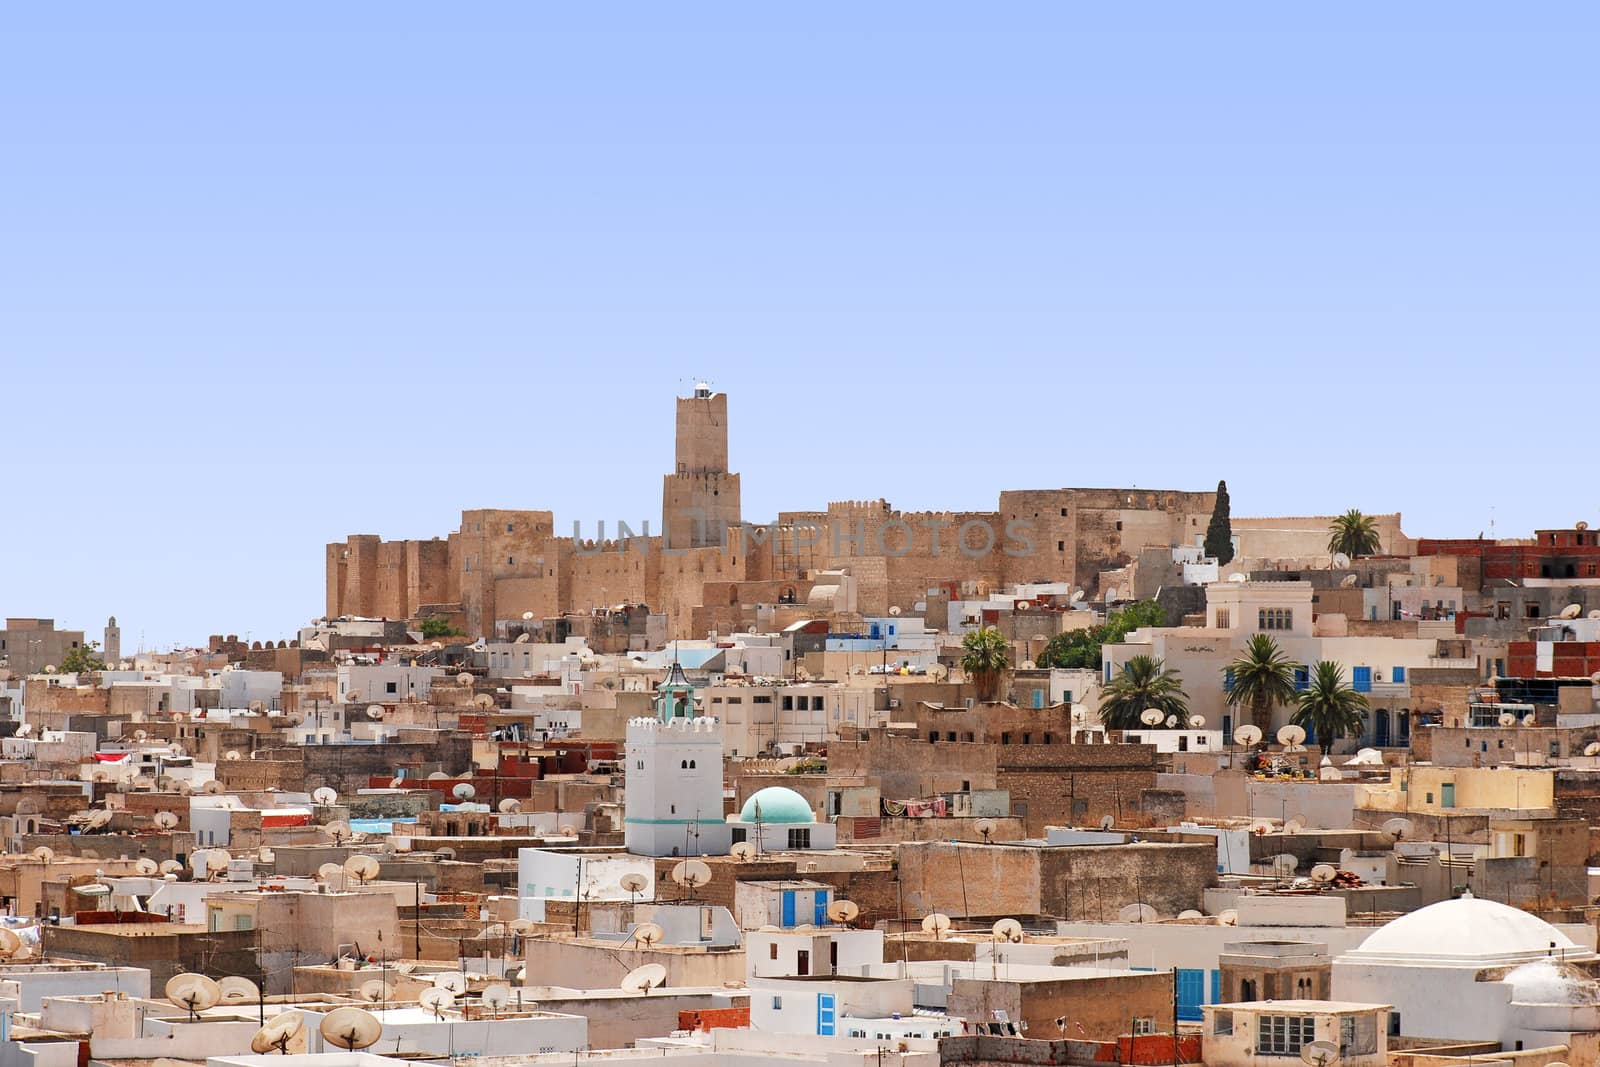 Overall view of city, roofs of houses, archeology museum of Sousse, Tunisia